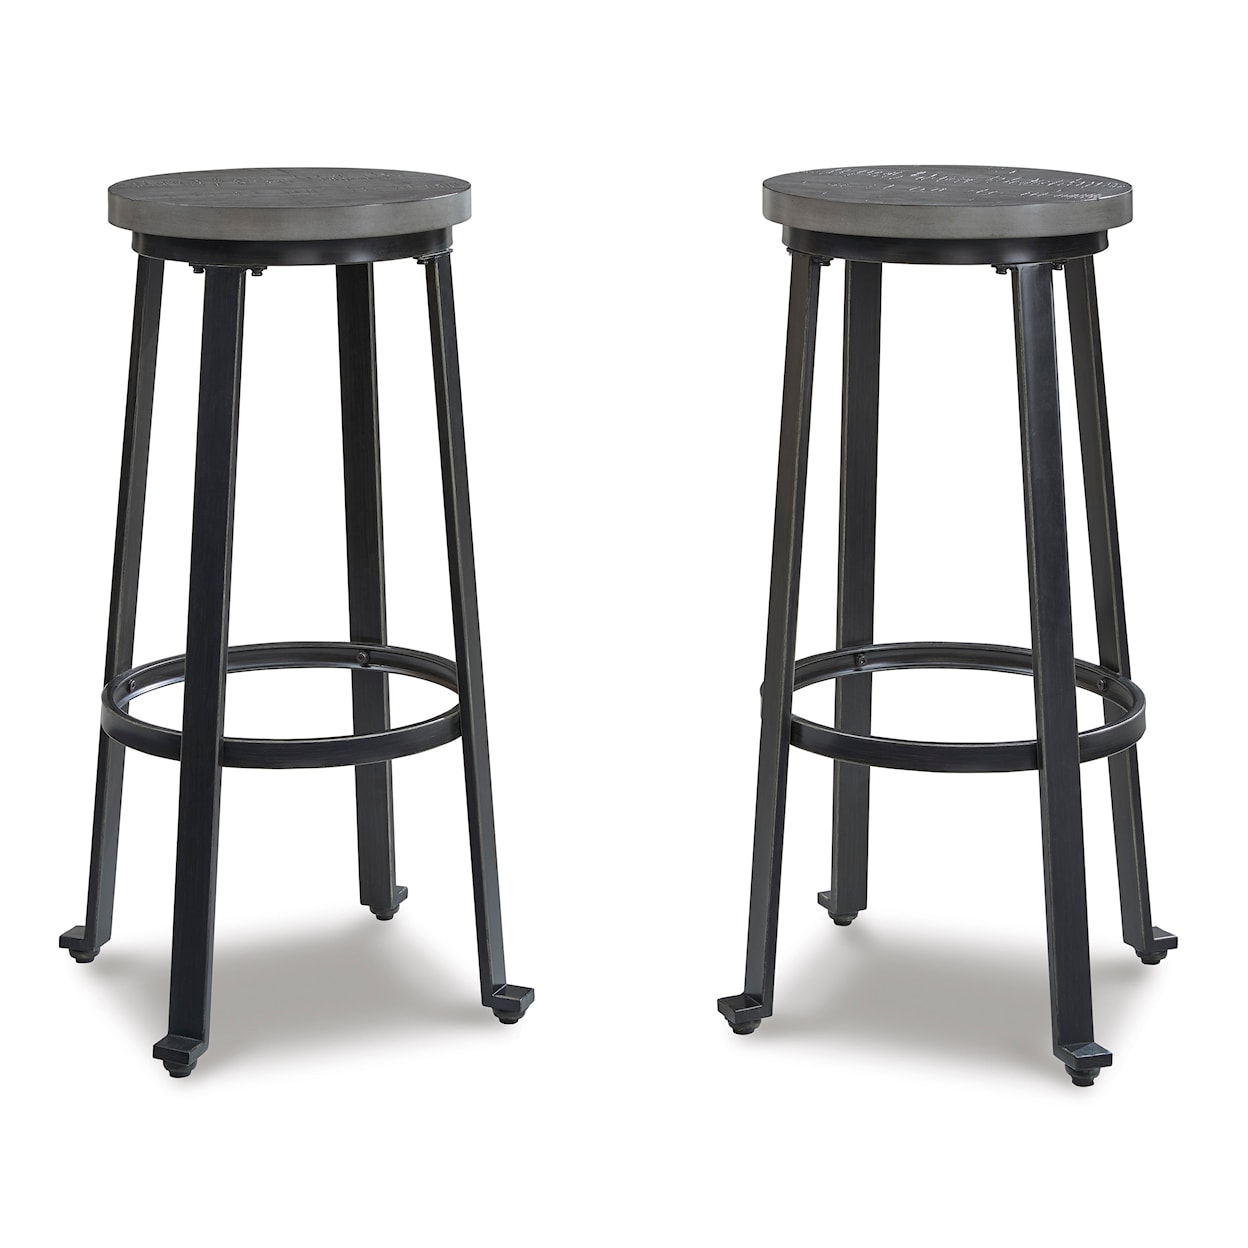 Signature Design by Ashley Challiman Bar Height Stool